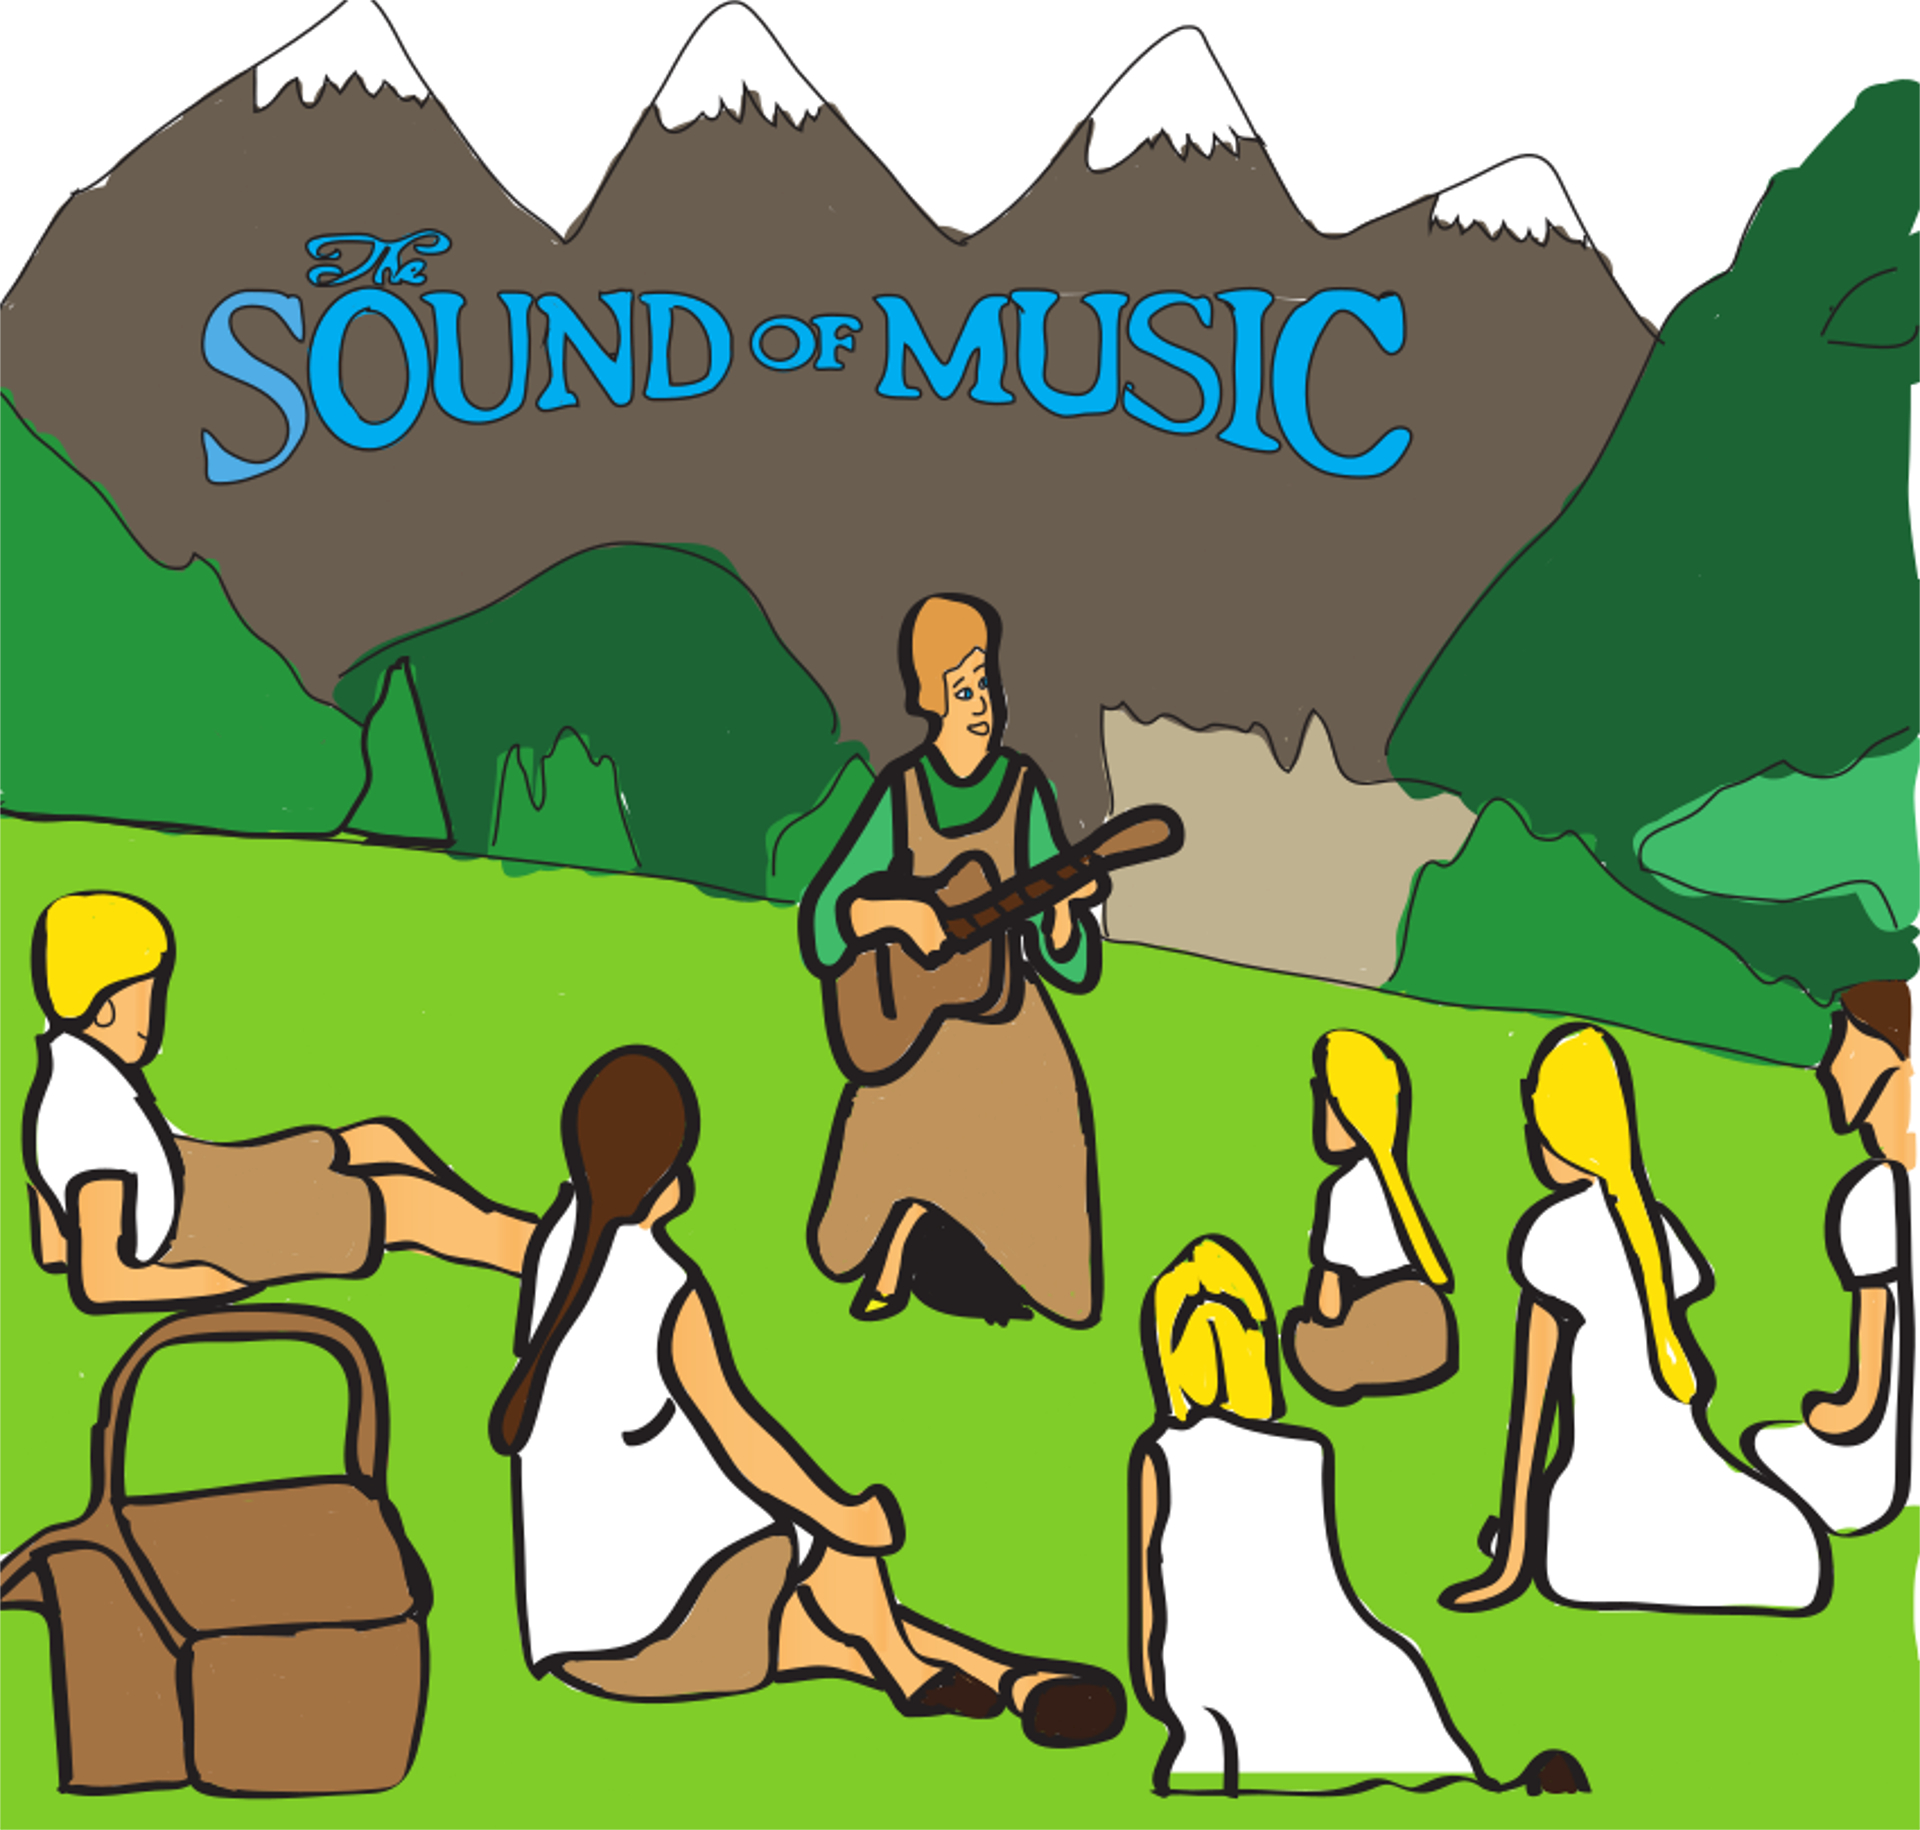 The Sound of Music by Rodgers & Hammerstein